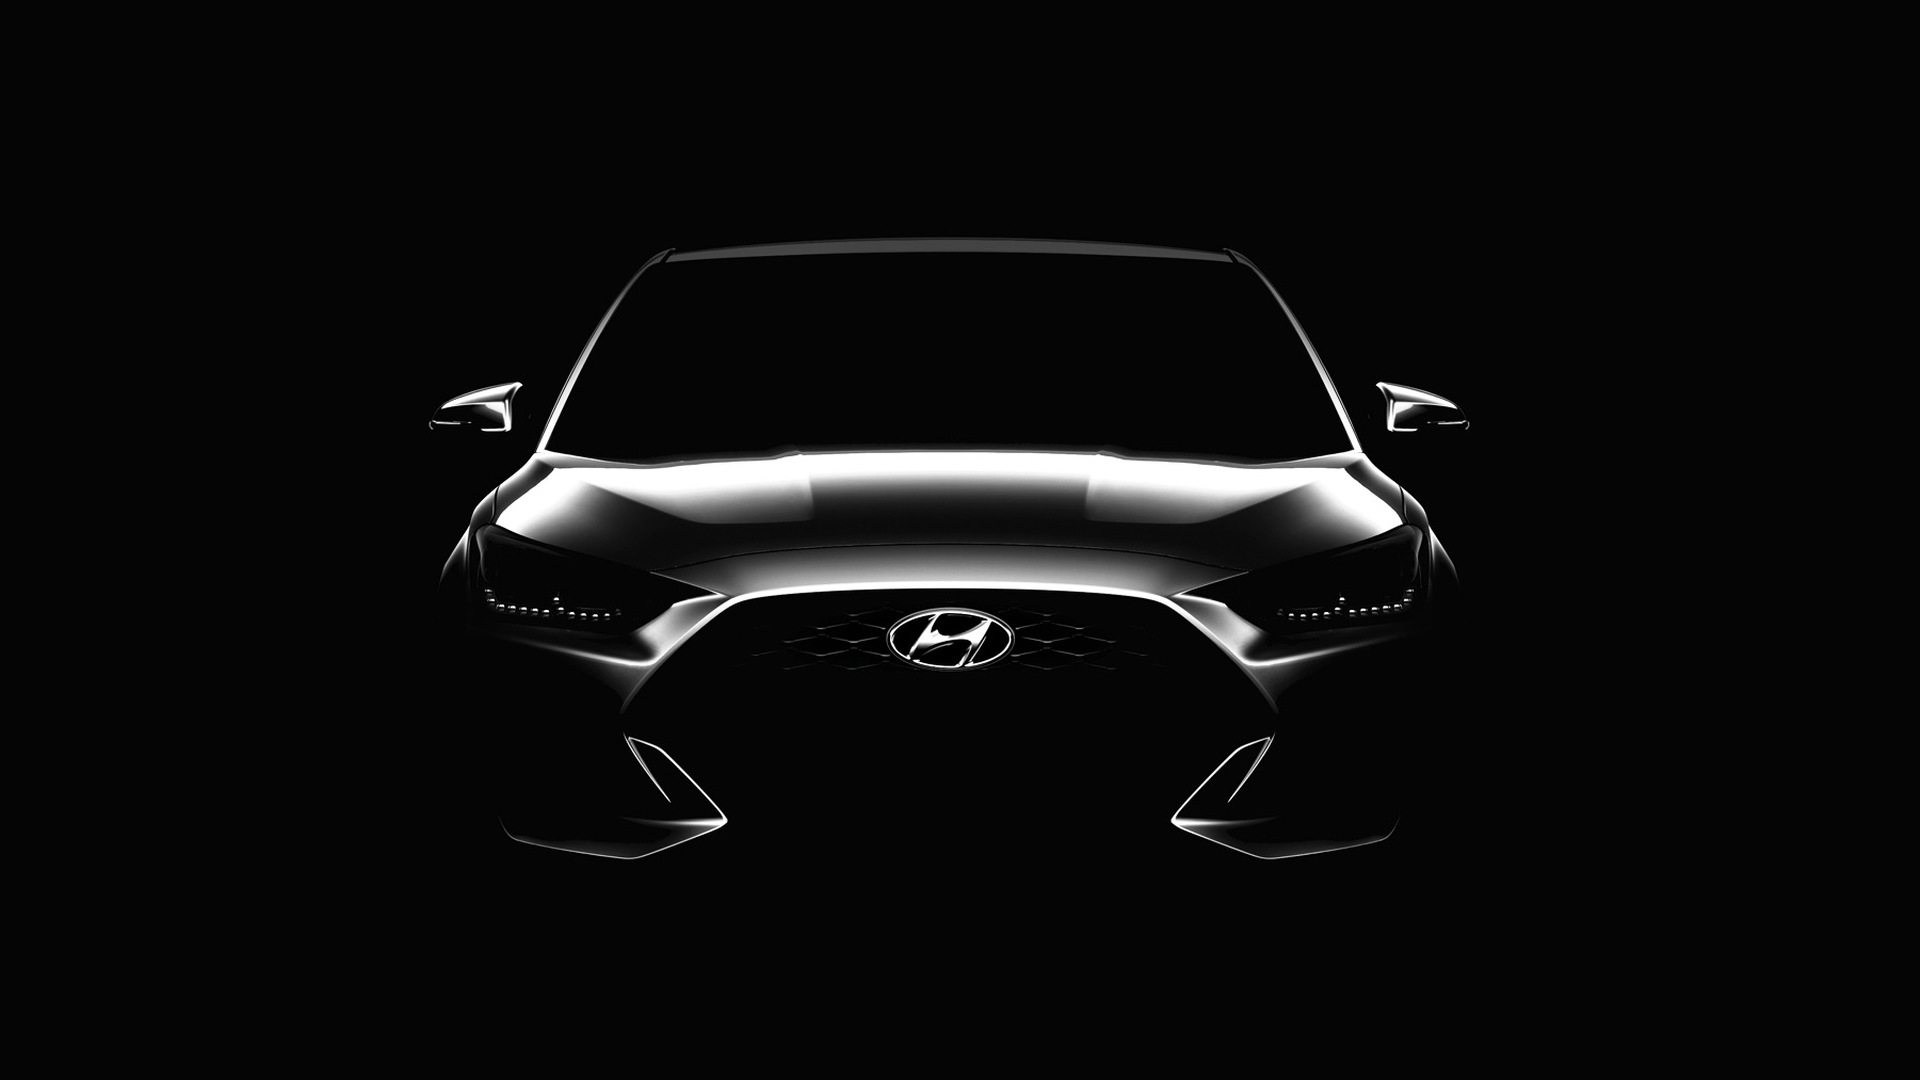 Teaser for 2019 Hyundai Veloster debuting at 2018 North American International Auto Show